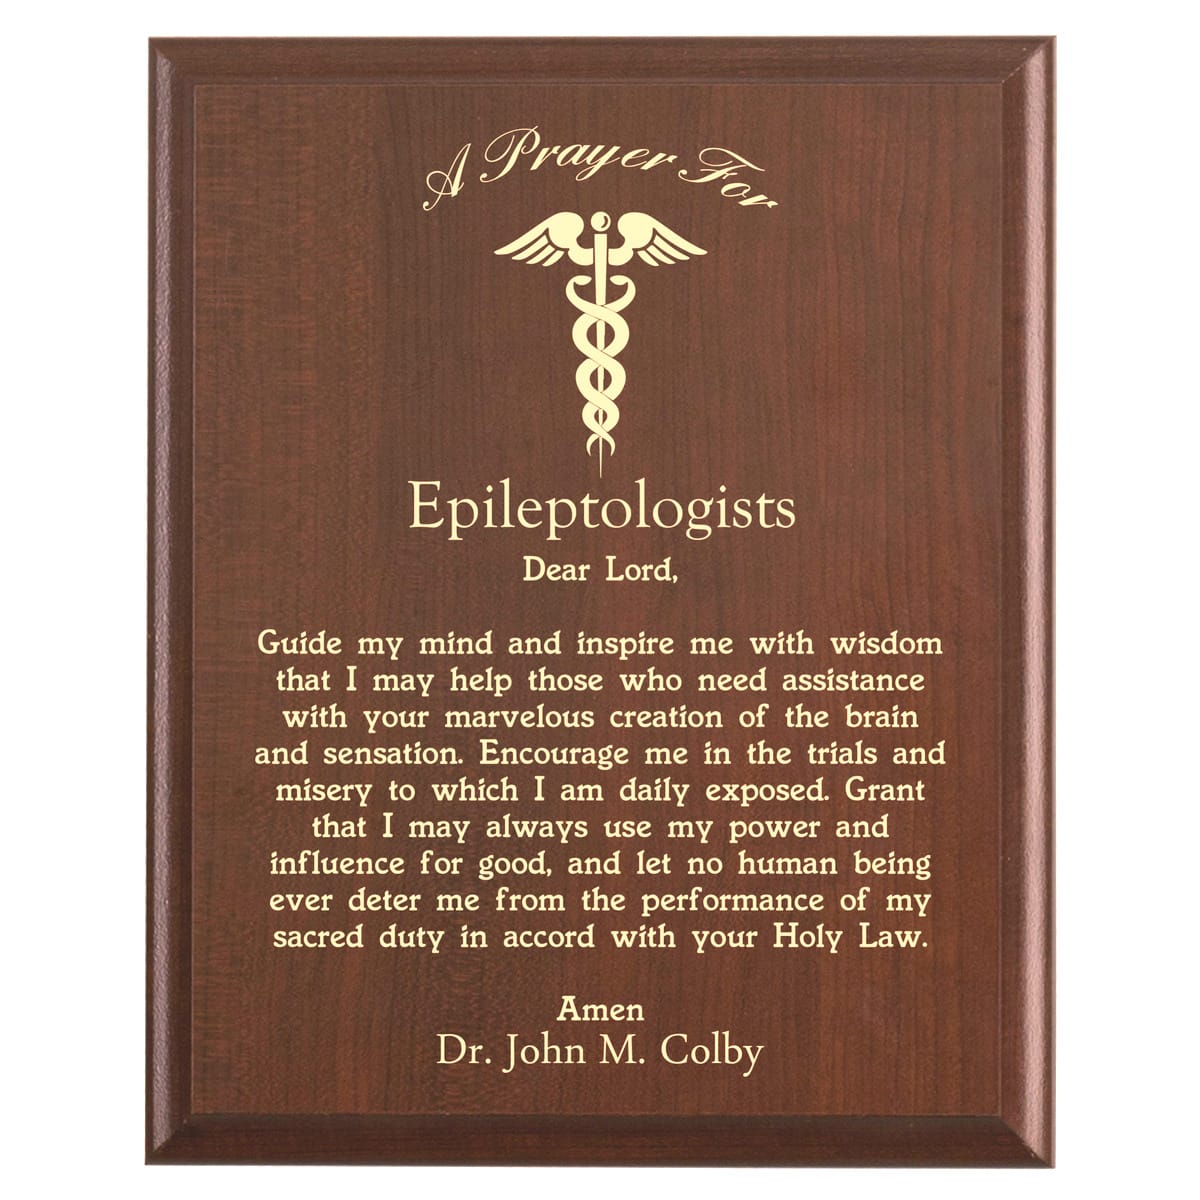 Plaque photo: Epileptologists Prayer Plaque design with free personalization. Wood style finish with customized text.